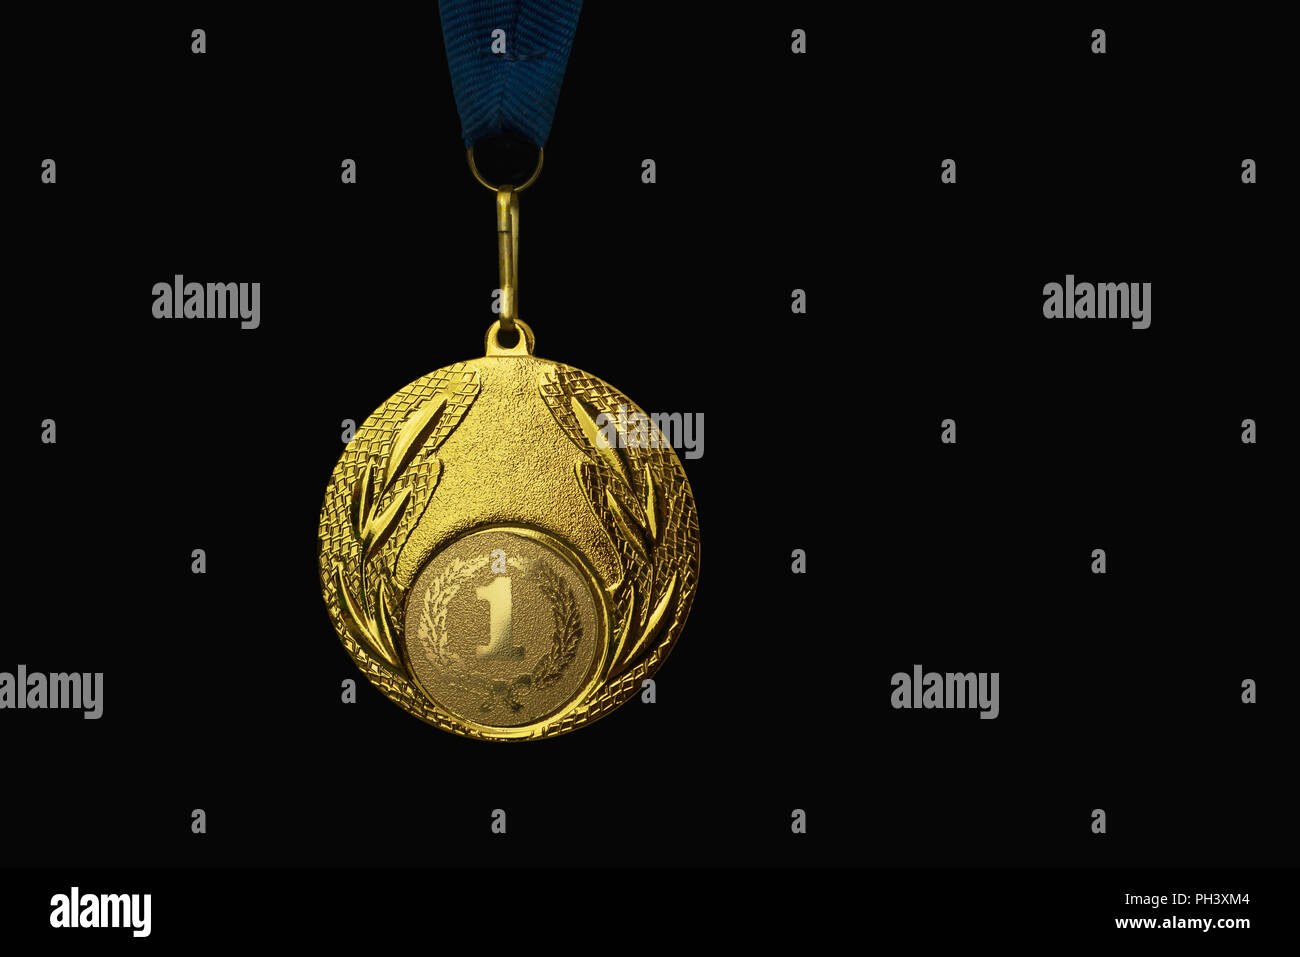 the winner's gold medal for the first place. Isolated on a black background. place for text. Stock Photo